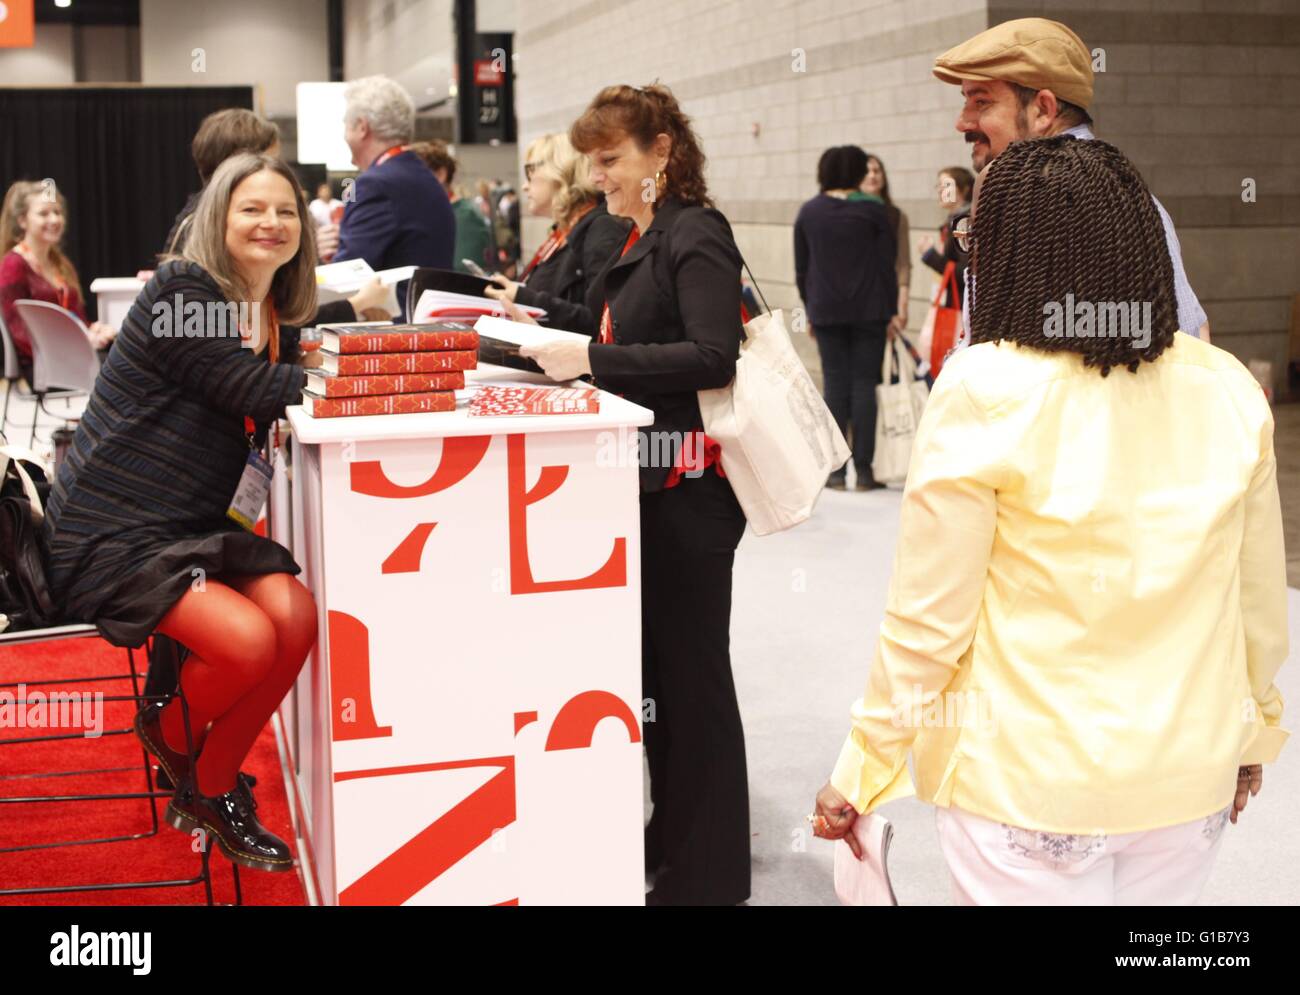 Chicago, Illinois, USA. 12 May 2016. Agata Tuszyńska signs copies of her memoir, 'Family History of Fear' just out from Knopf  for fans at the Polish stand at BookExpo America 2016. Stock Photo